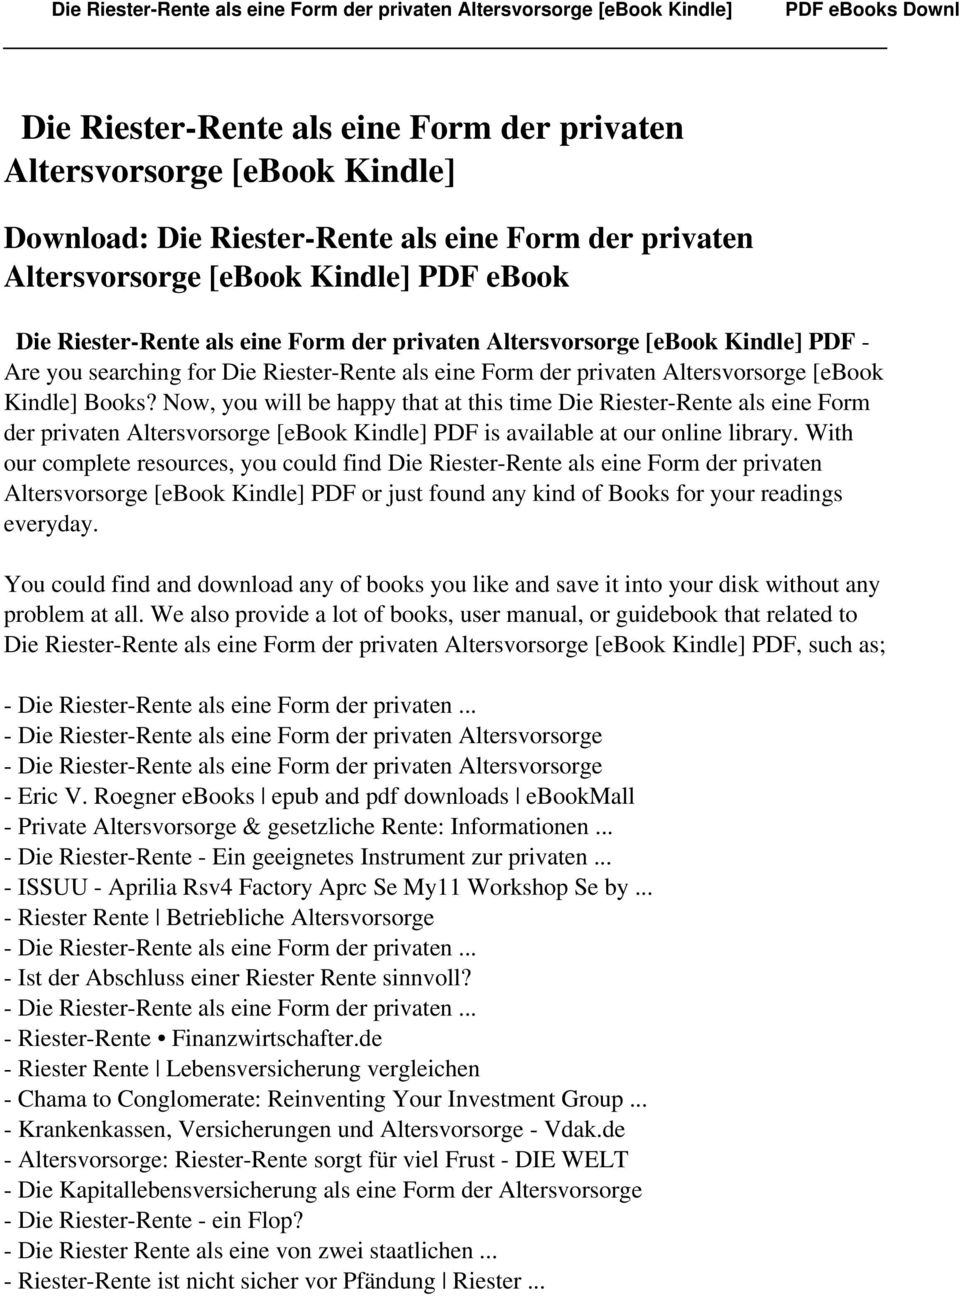 Now, you will be happy that at this time Die Riester-Rente als eine Form der privaten Altersvorsorge [ebook Kindle] PDF is available at our online library.